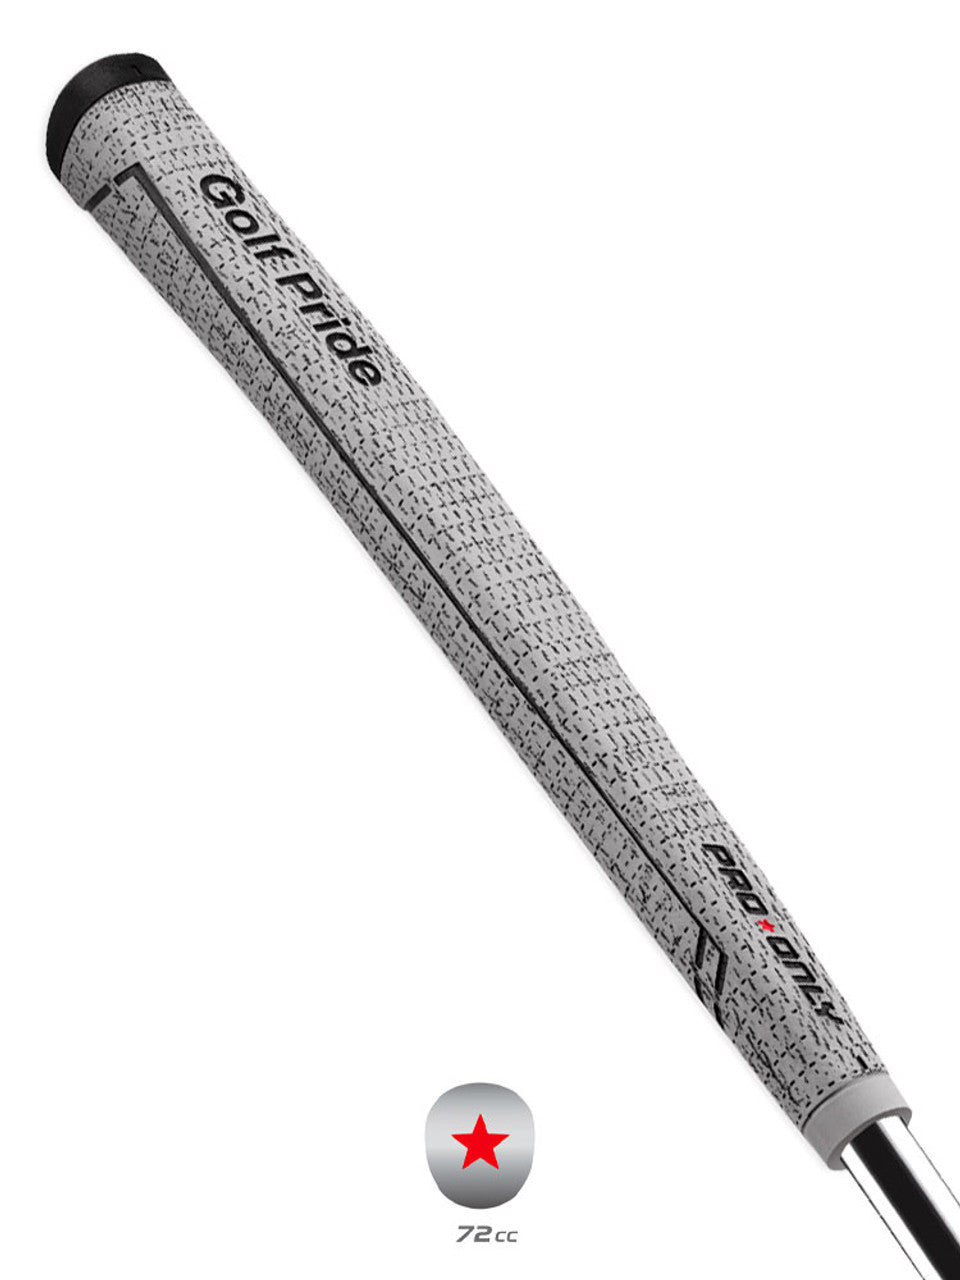 Golf Pride Pro Only Cord Putter 72cc